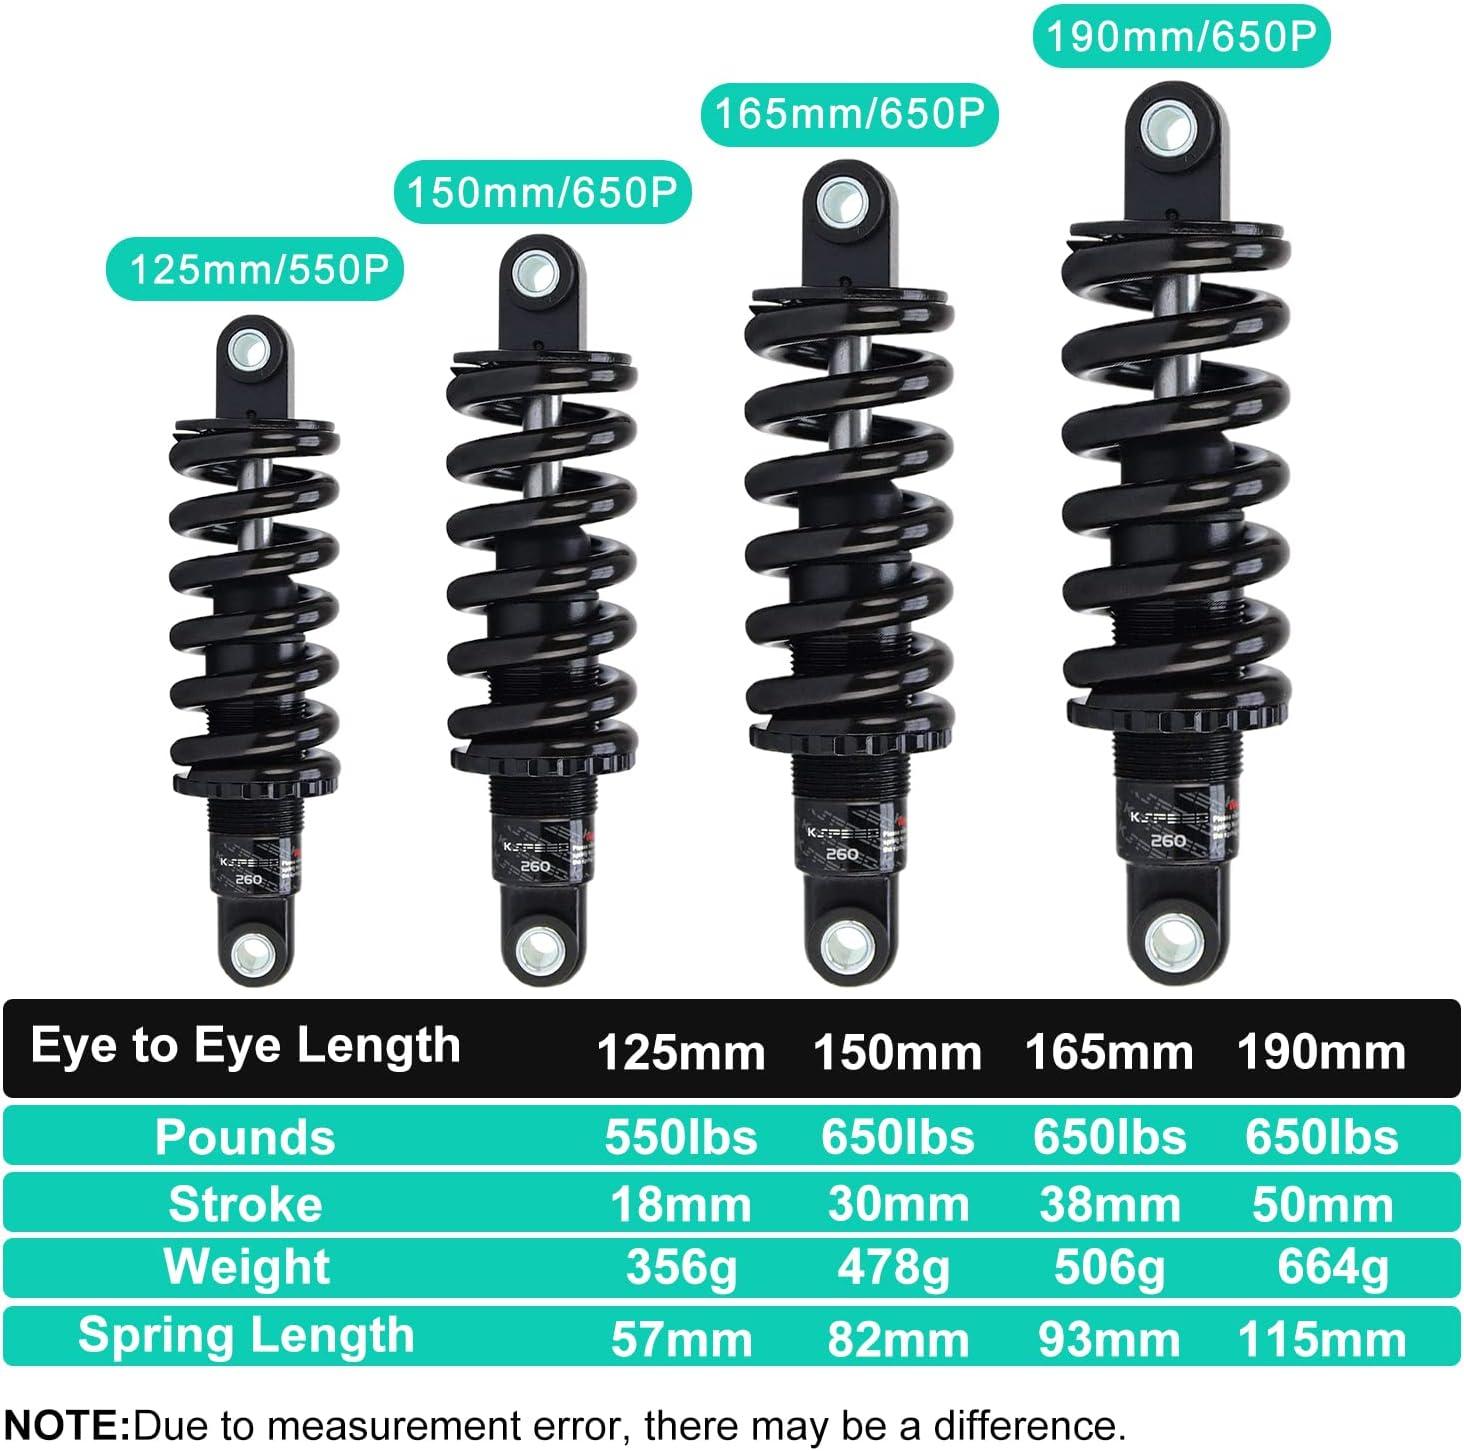 Shock Absorber Size Guide